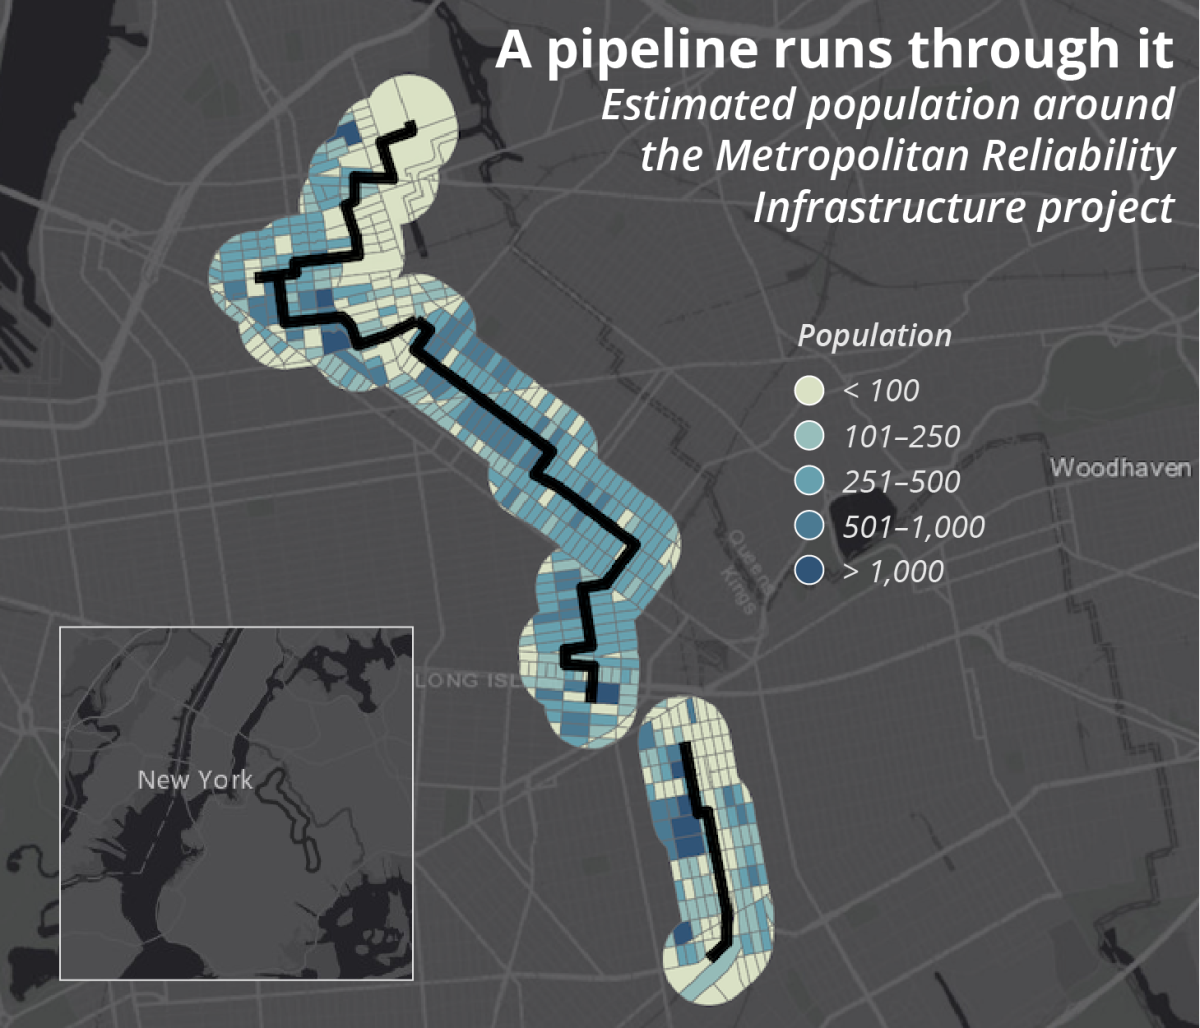 A map showing estimated population around the Metropolitan Reliability Infrastructure pipeline project in Brooklyn, New York. The corridor is densely populated.